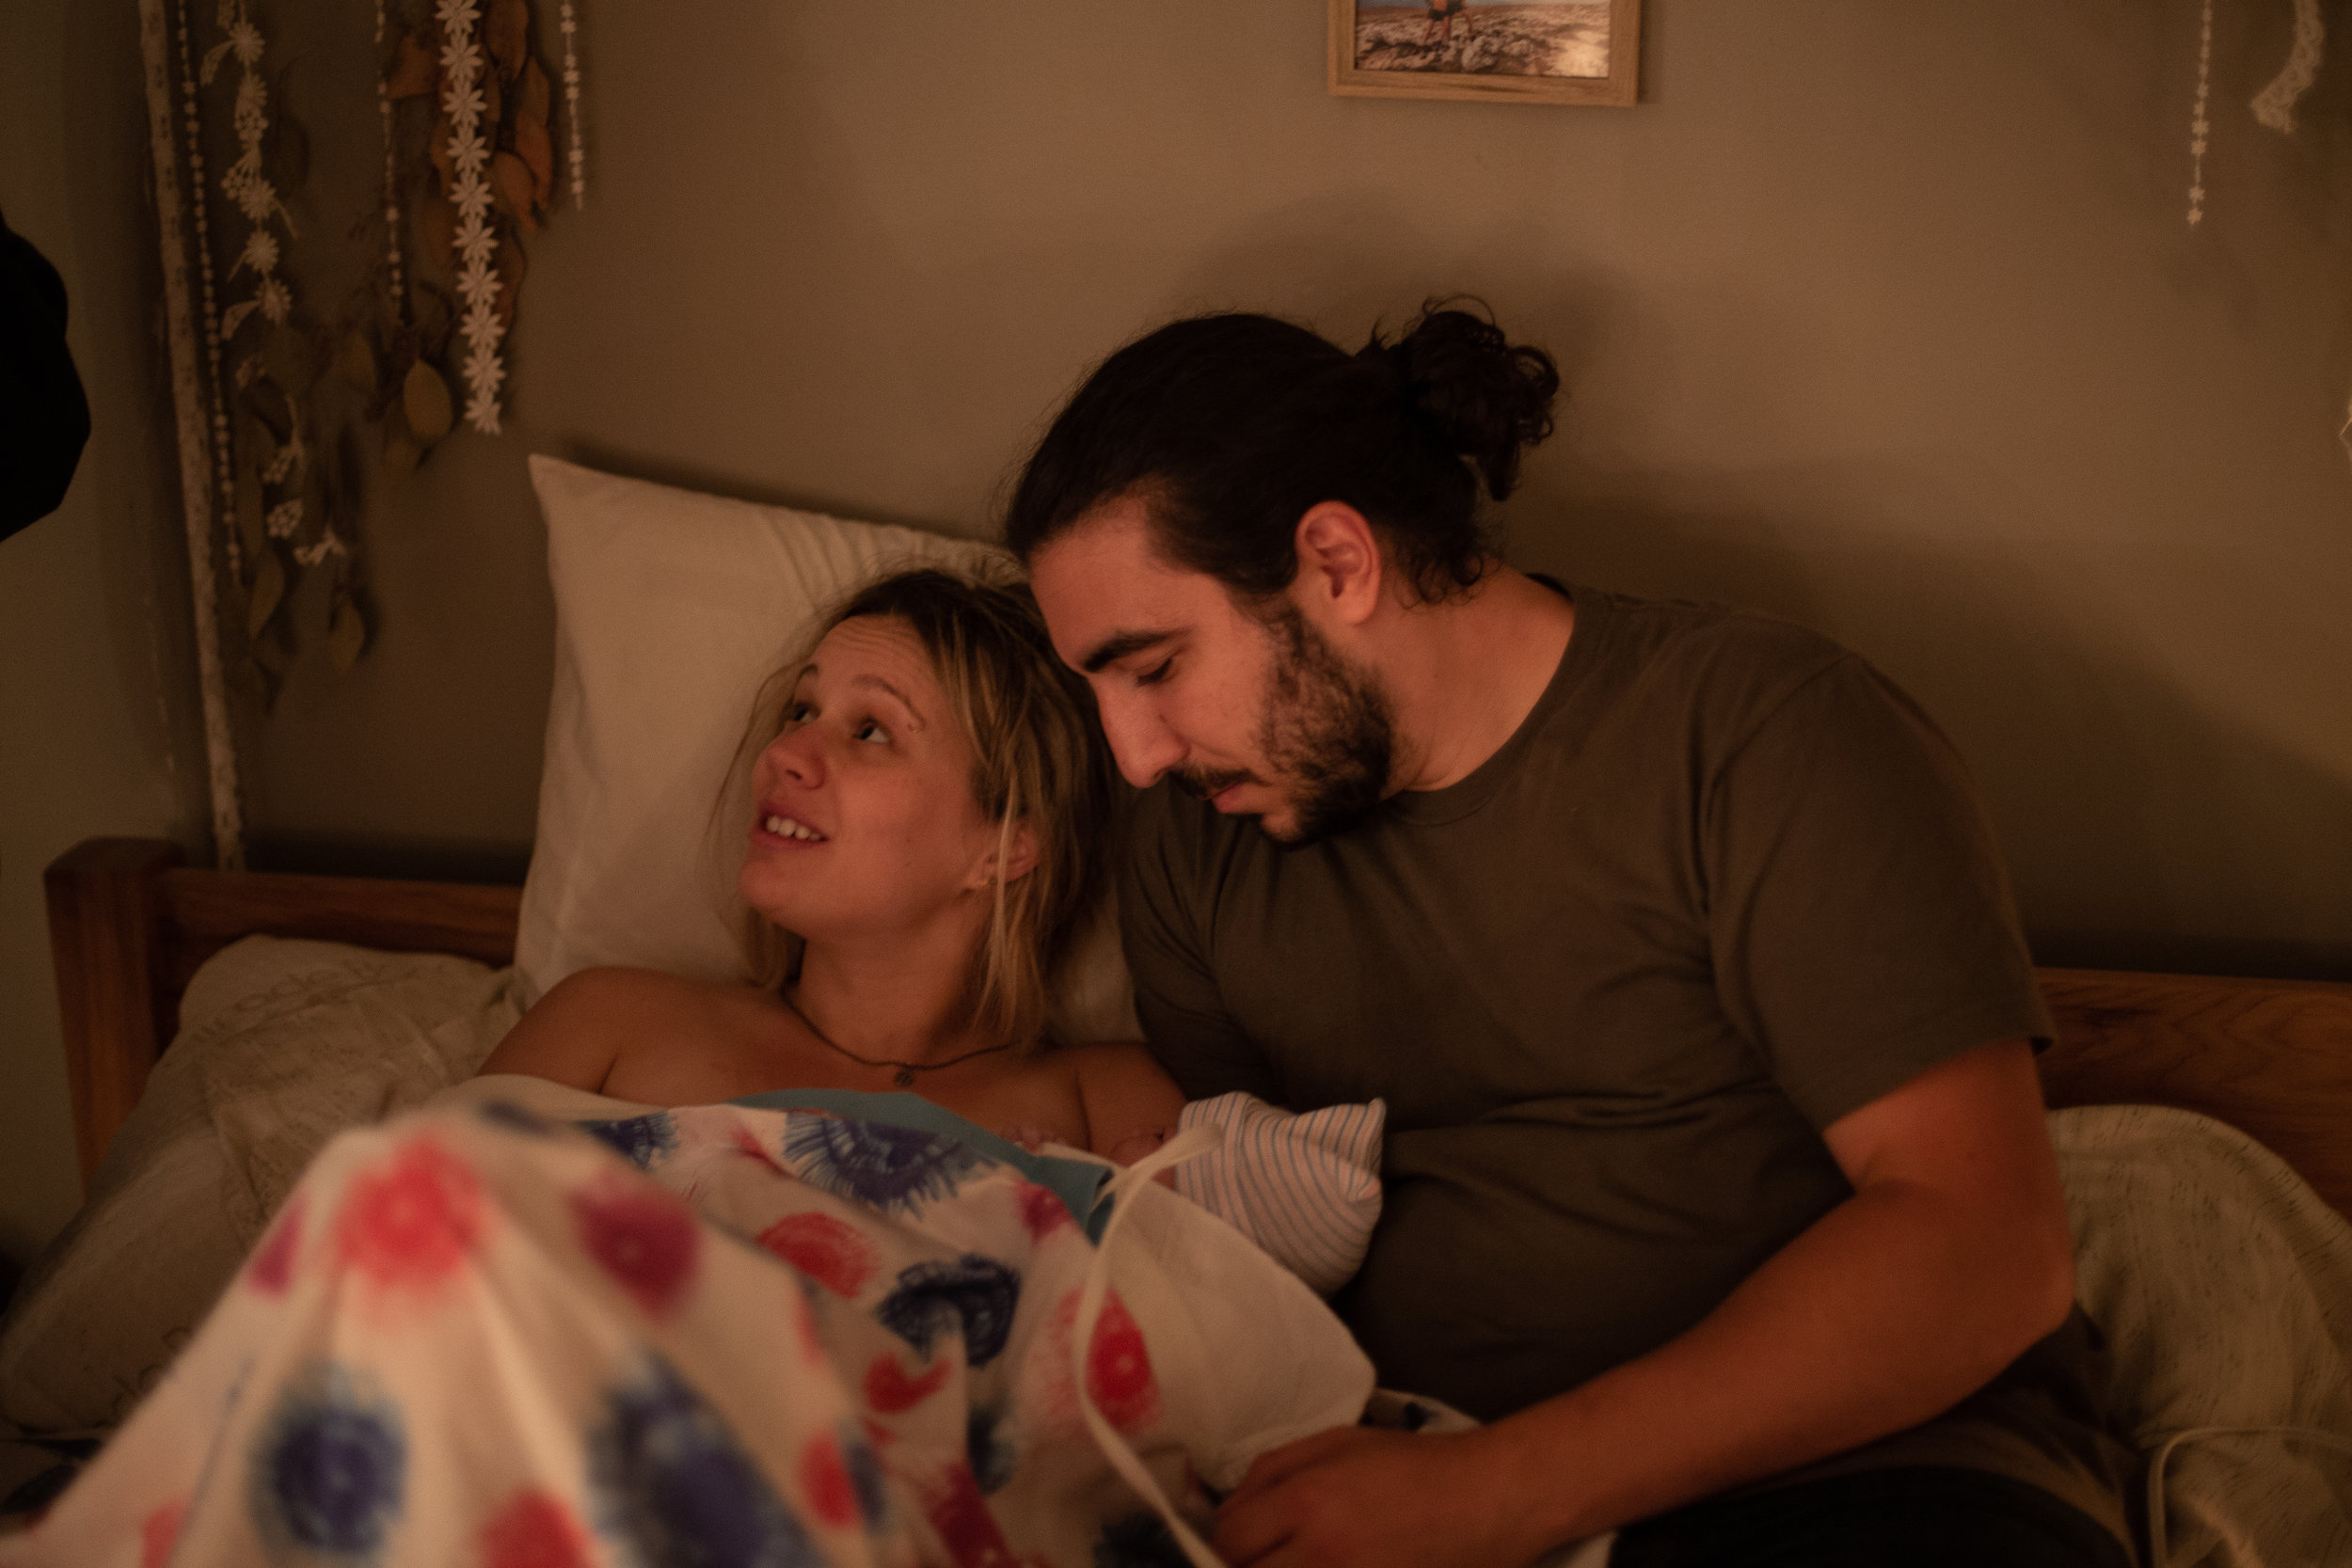 A new mom and dad snuggle with their baby in bed immediately after their home birth. 